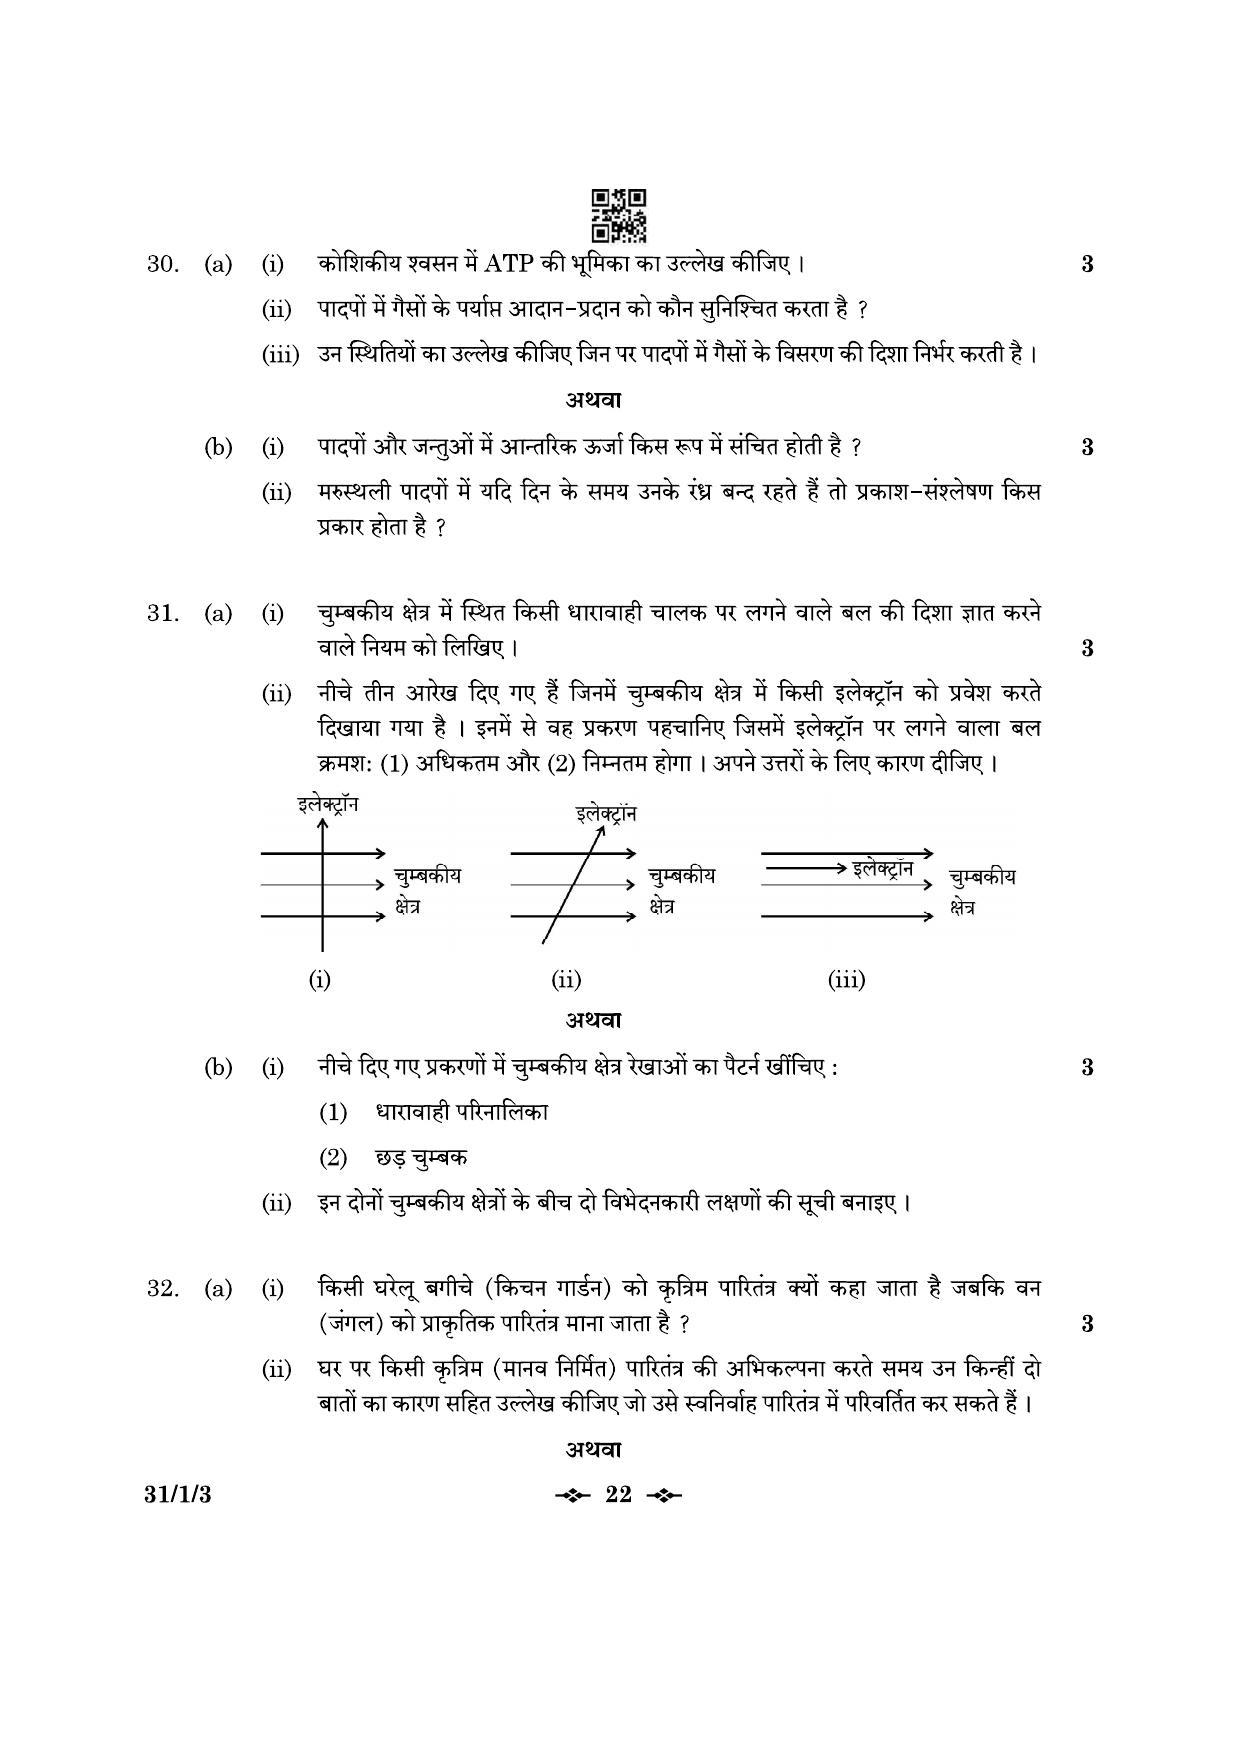 CBSE Class 10 31-1-3 Science 2023 Question Paper - Page 22